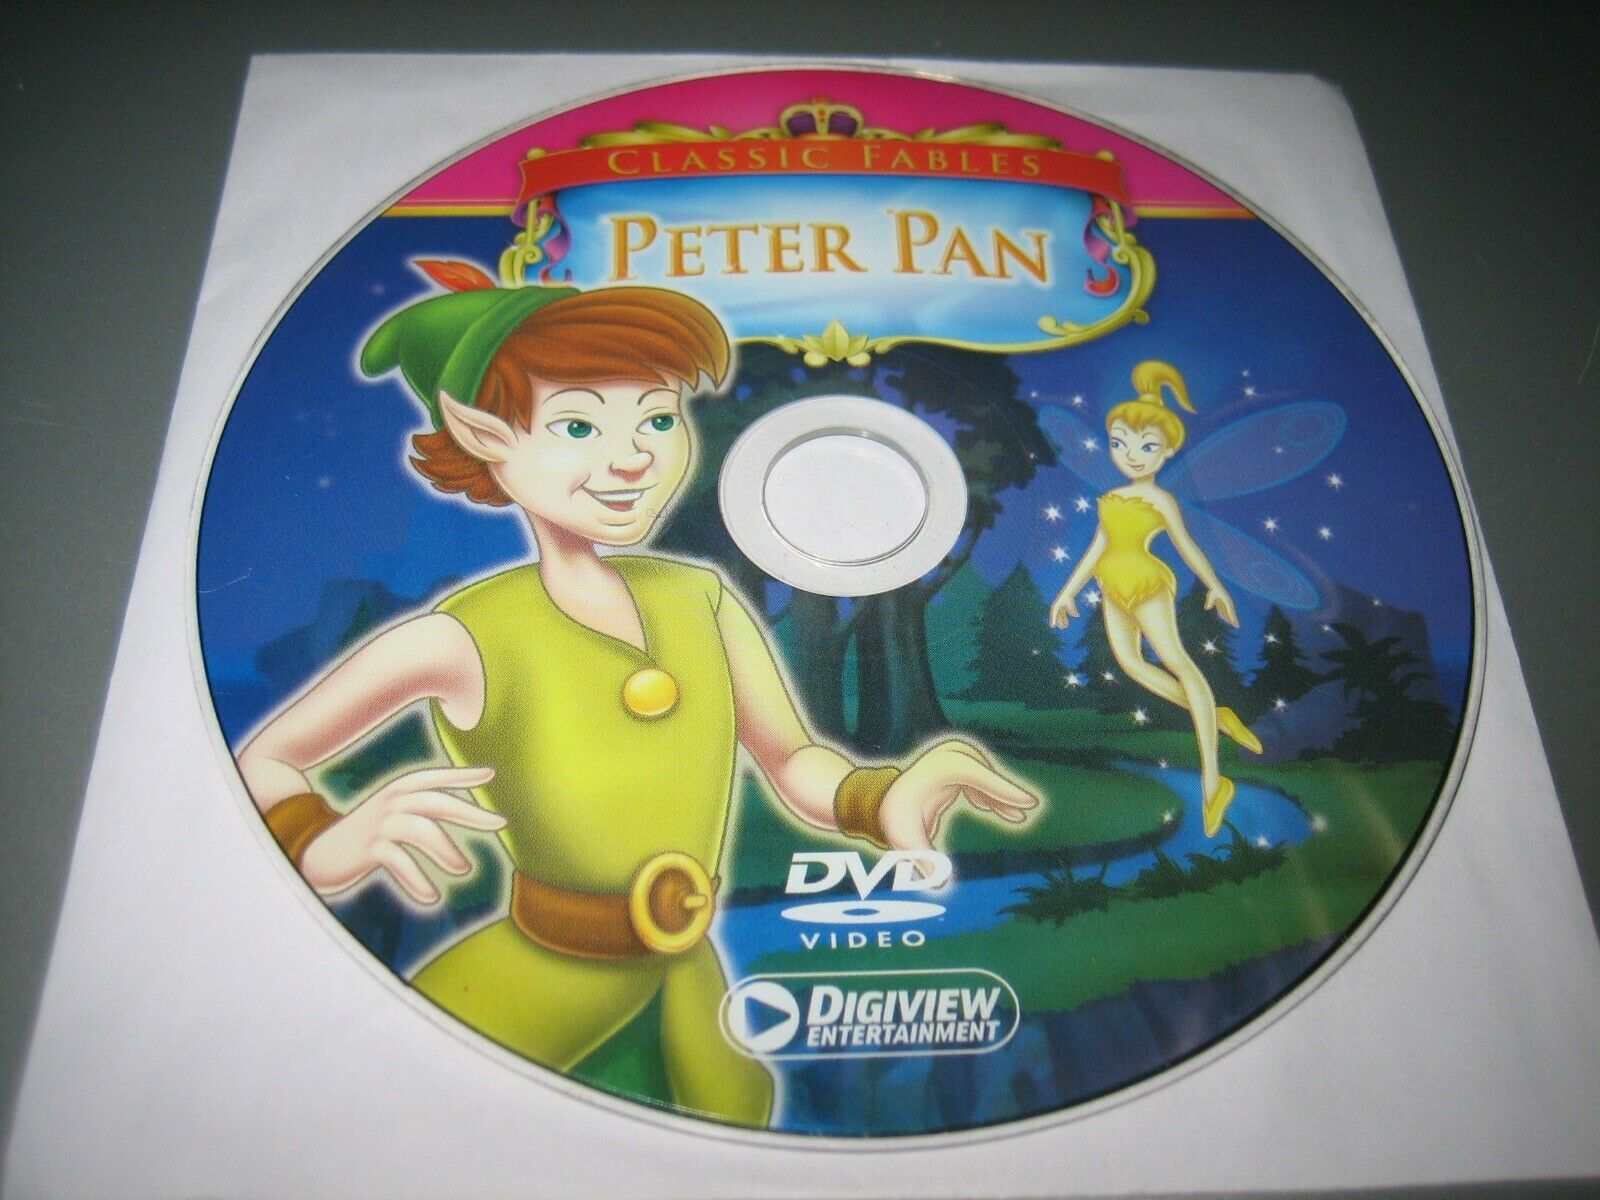 Primary image for Classic Fables - Peter Pan (DVD, 2005) - Disc Only!!!